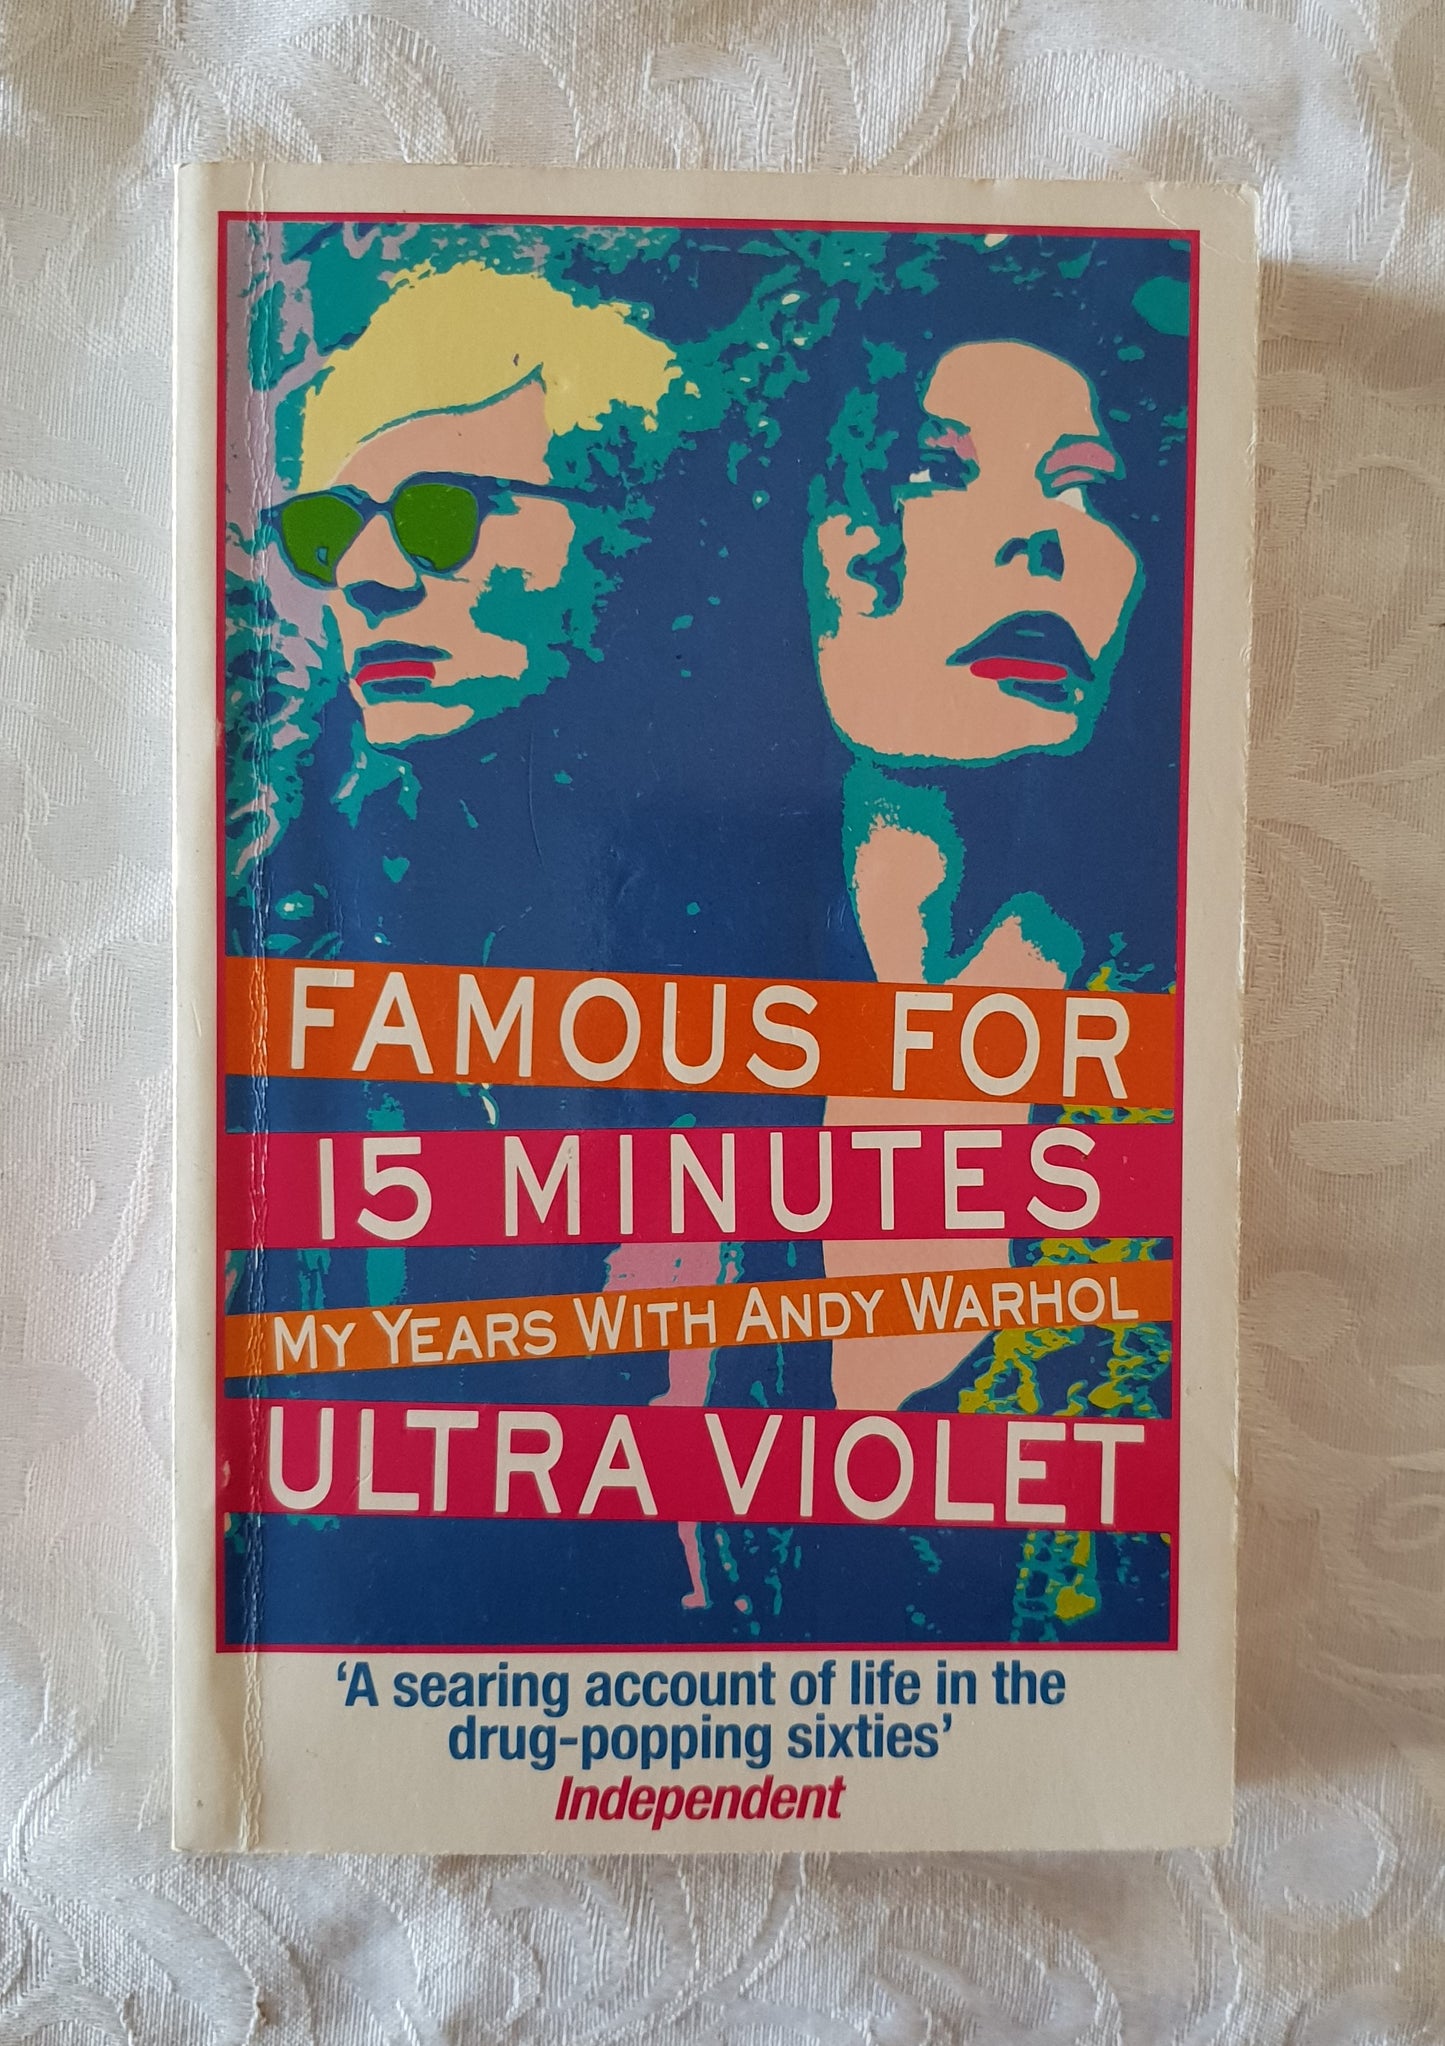 Famous for 15 Minutes by Ultra Violet